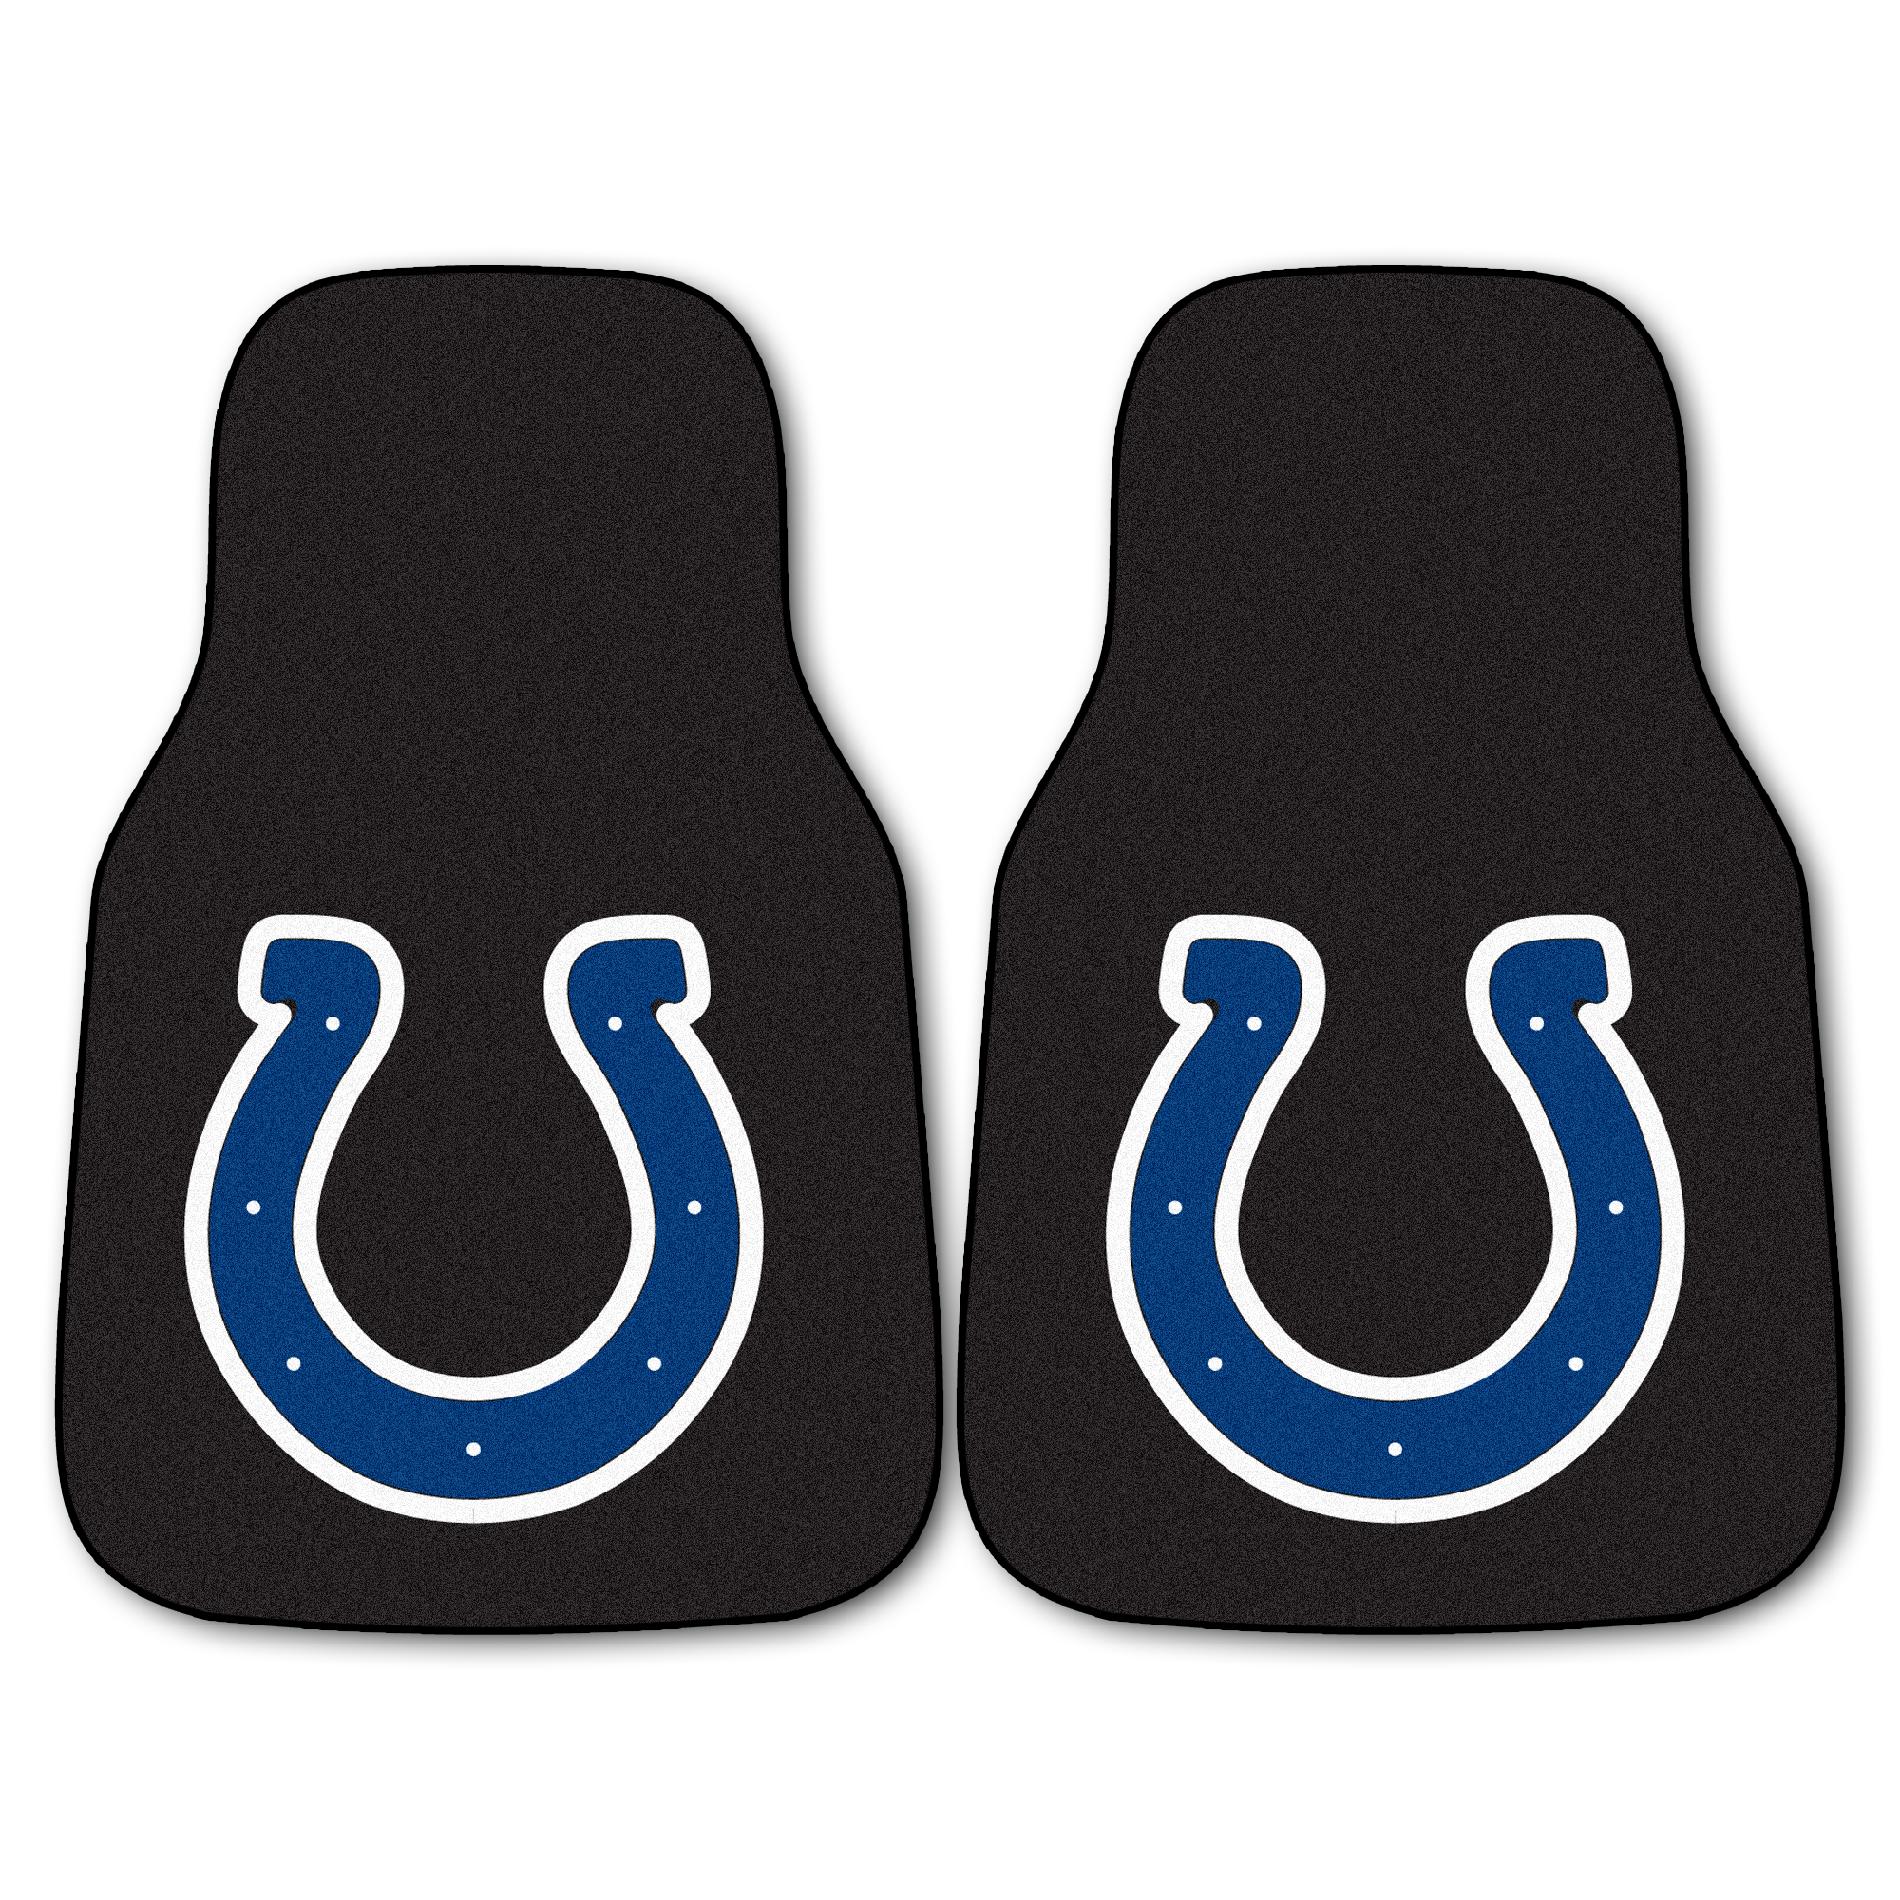 National Football League Indianapolis Colts 2-piece Carpeted Car Mats 18" x 27"